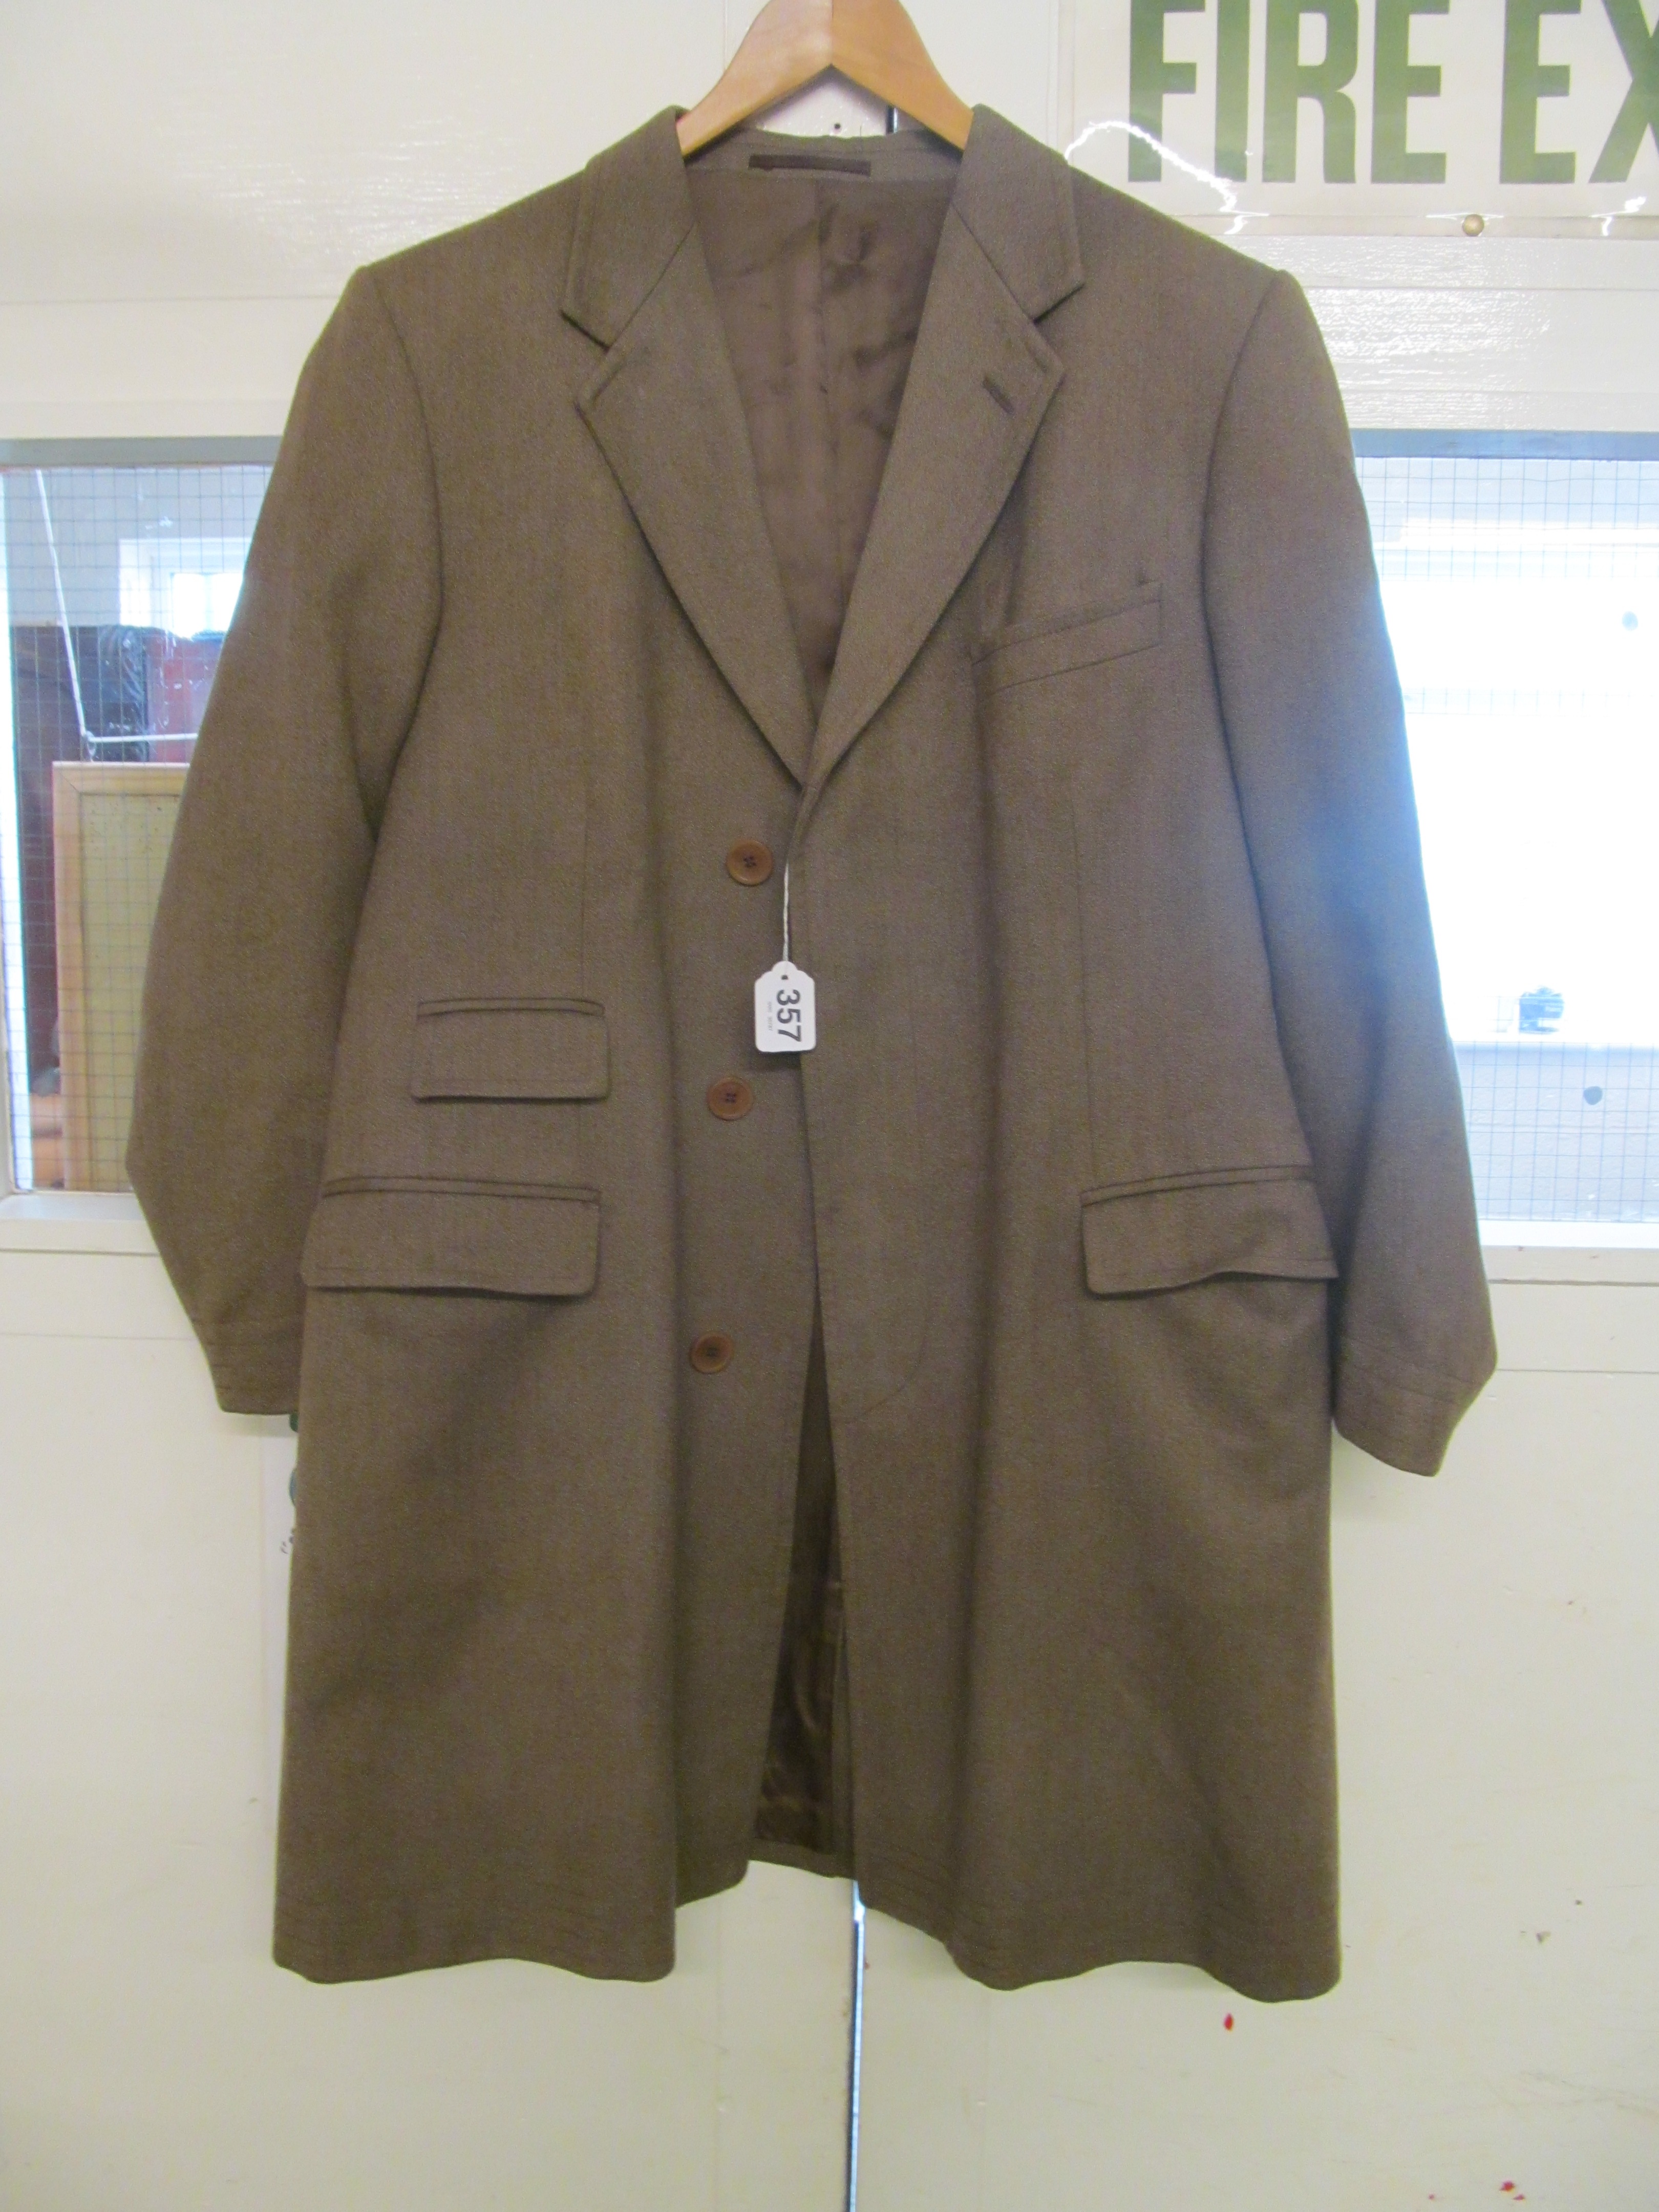 A Gieves and Hawke overcoat